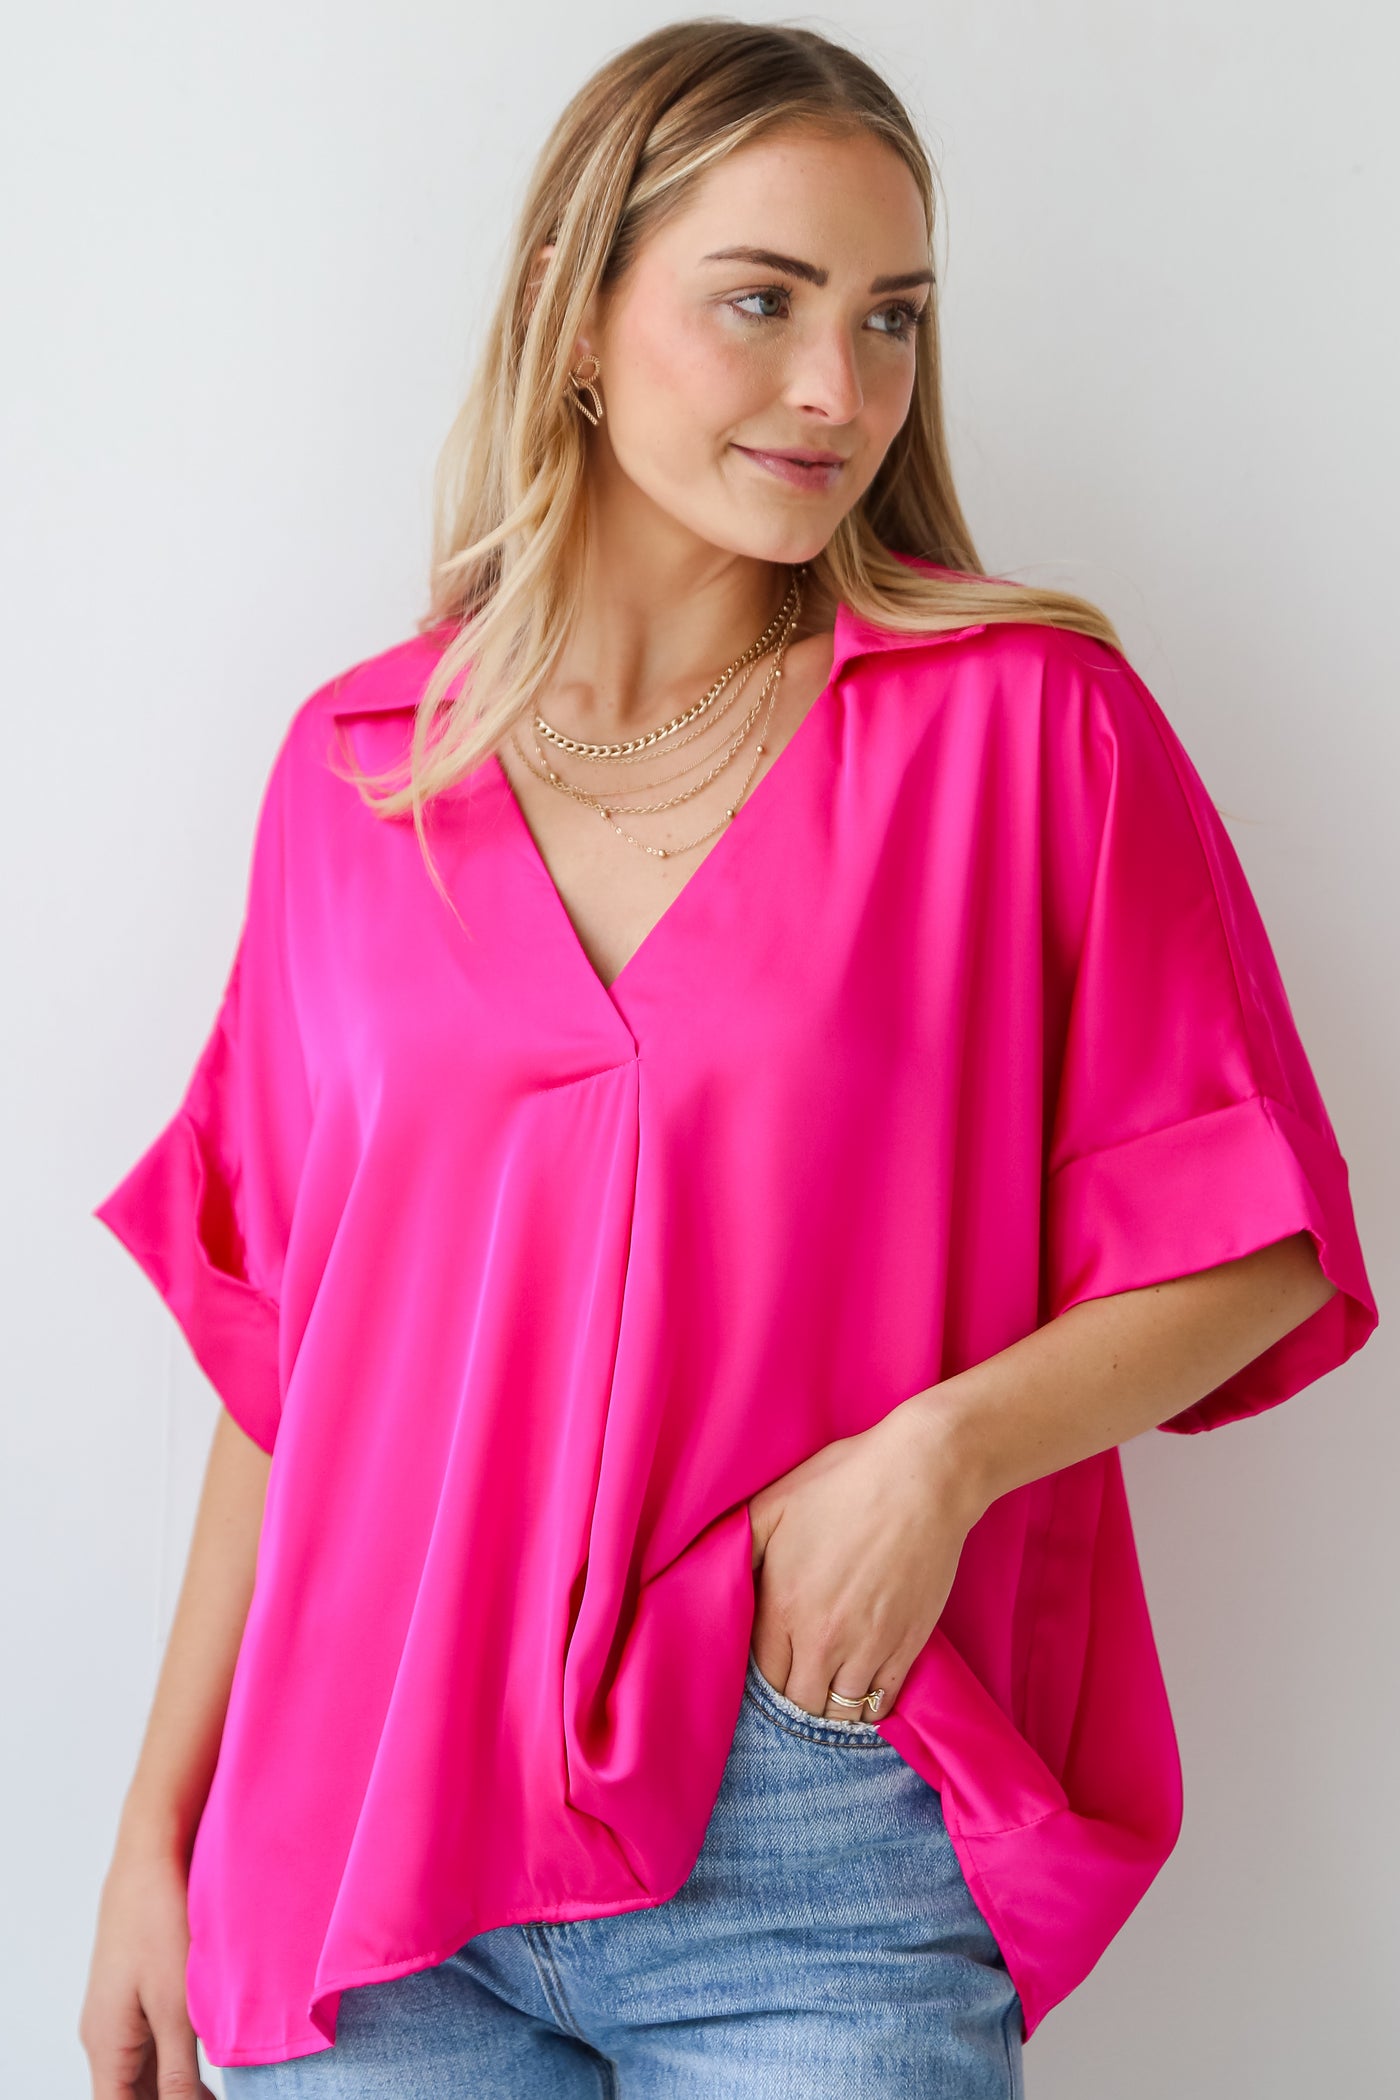 Hot Pink Satin Blouse for women